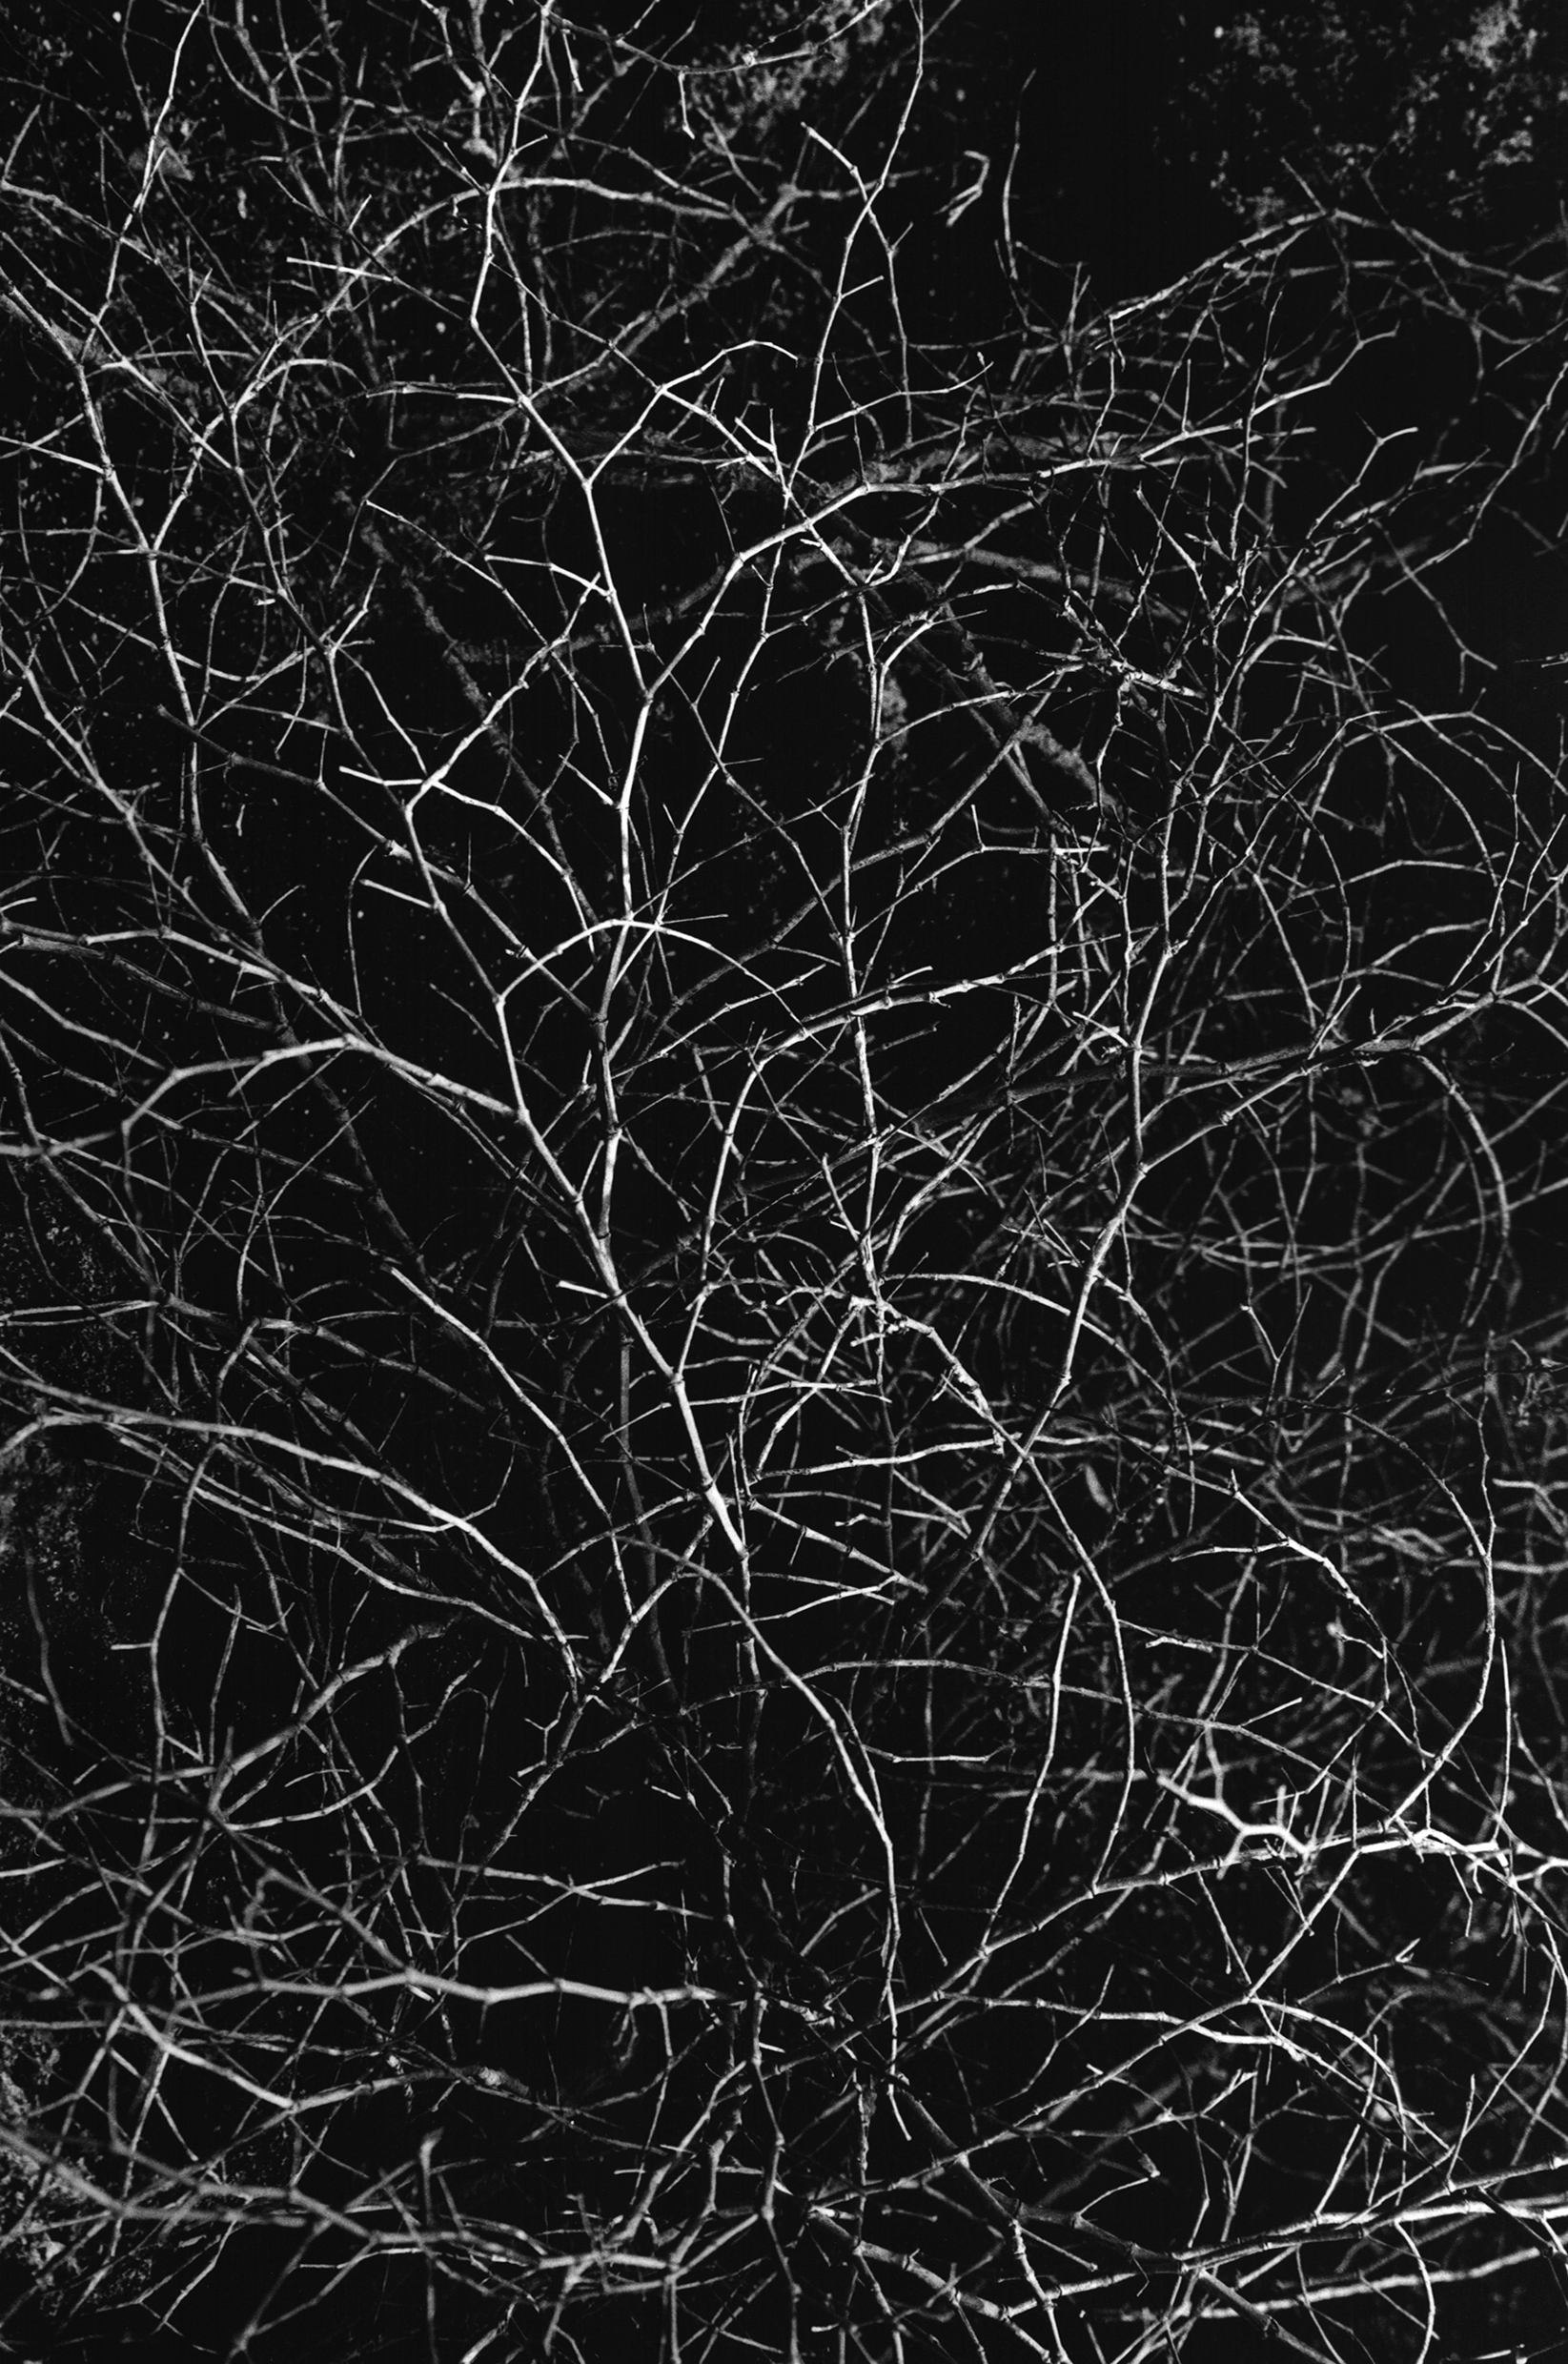 Impenetrable Thicket 
(2022, 36 x 24 cm, silver print)